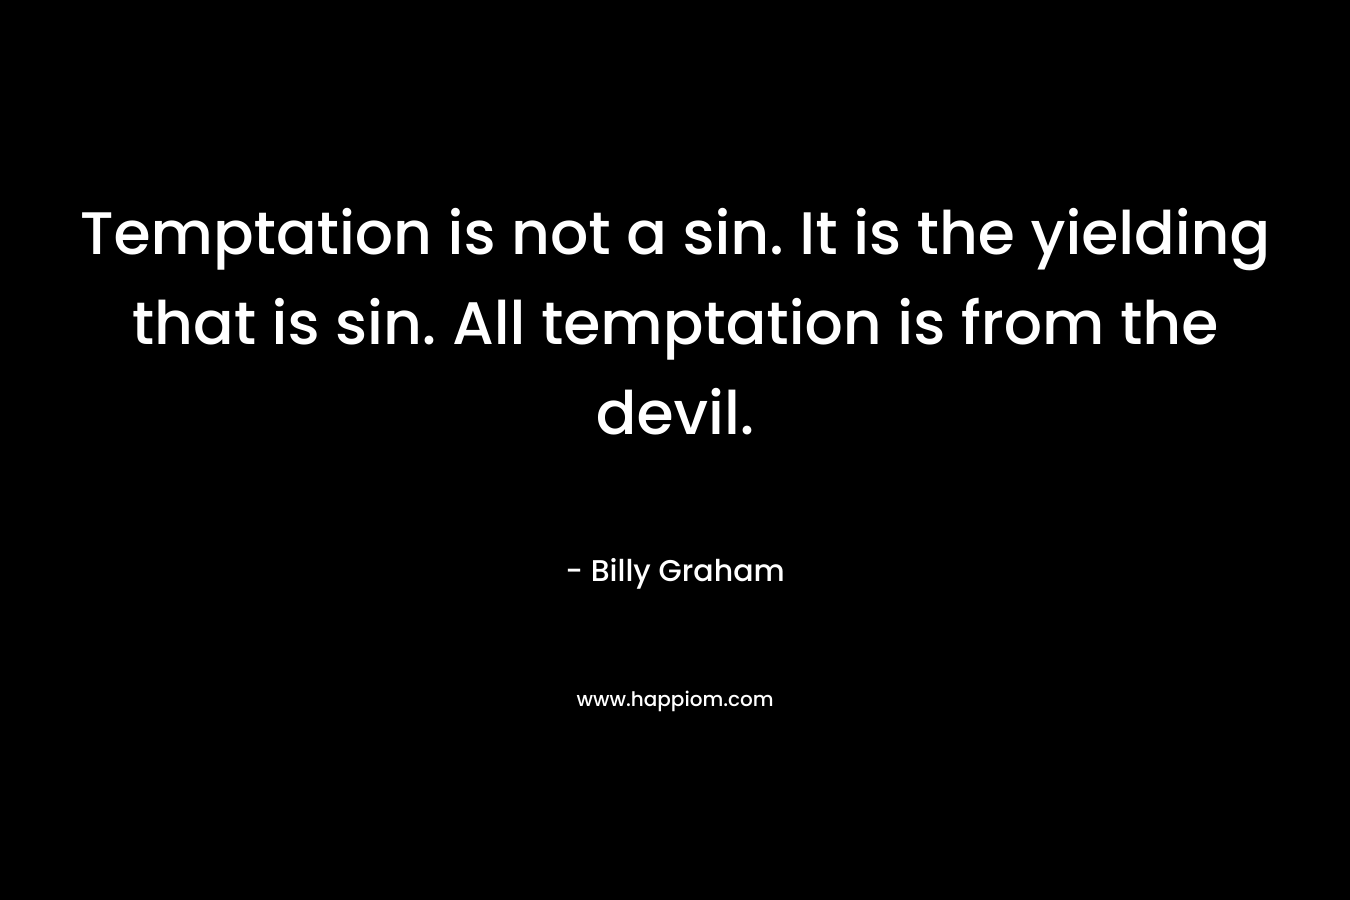 Temptation is not a sin. It is the yielding that is sin. All temptation is from the devil.